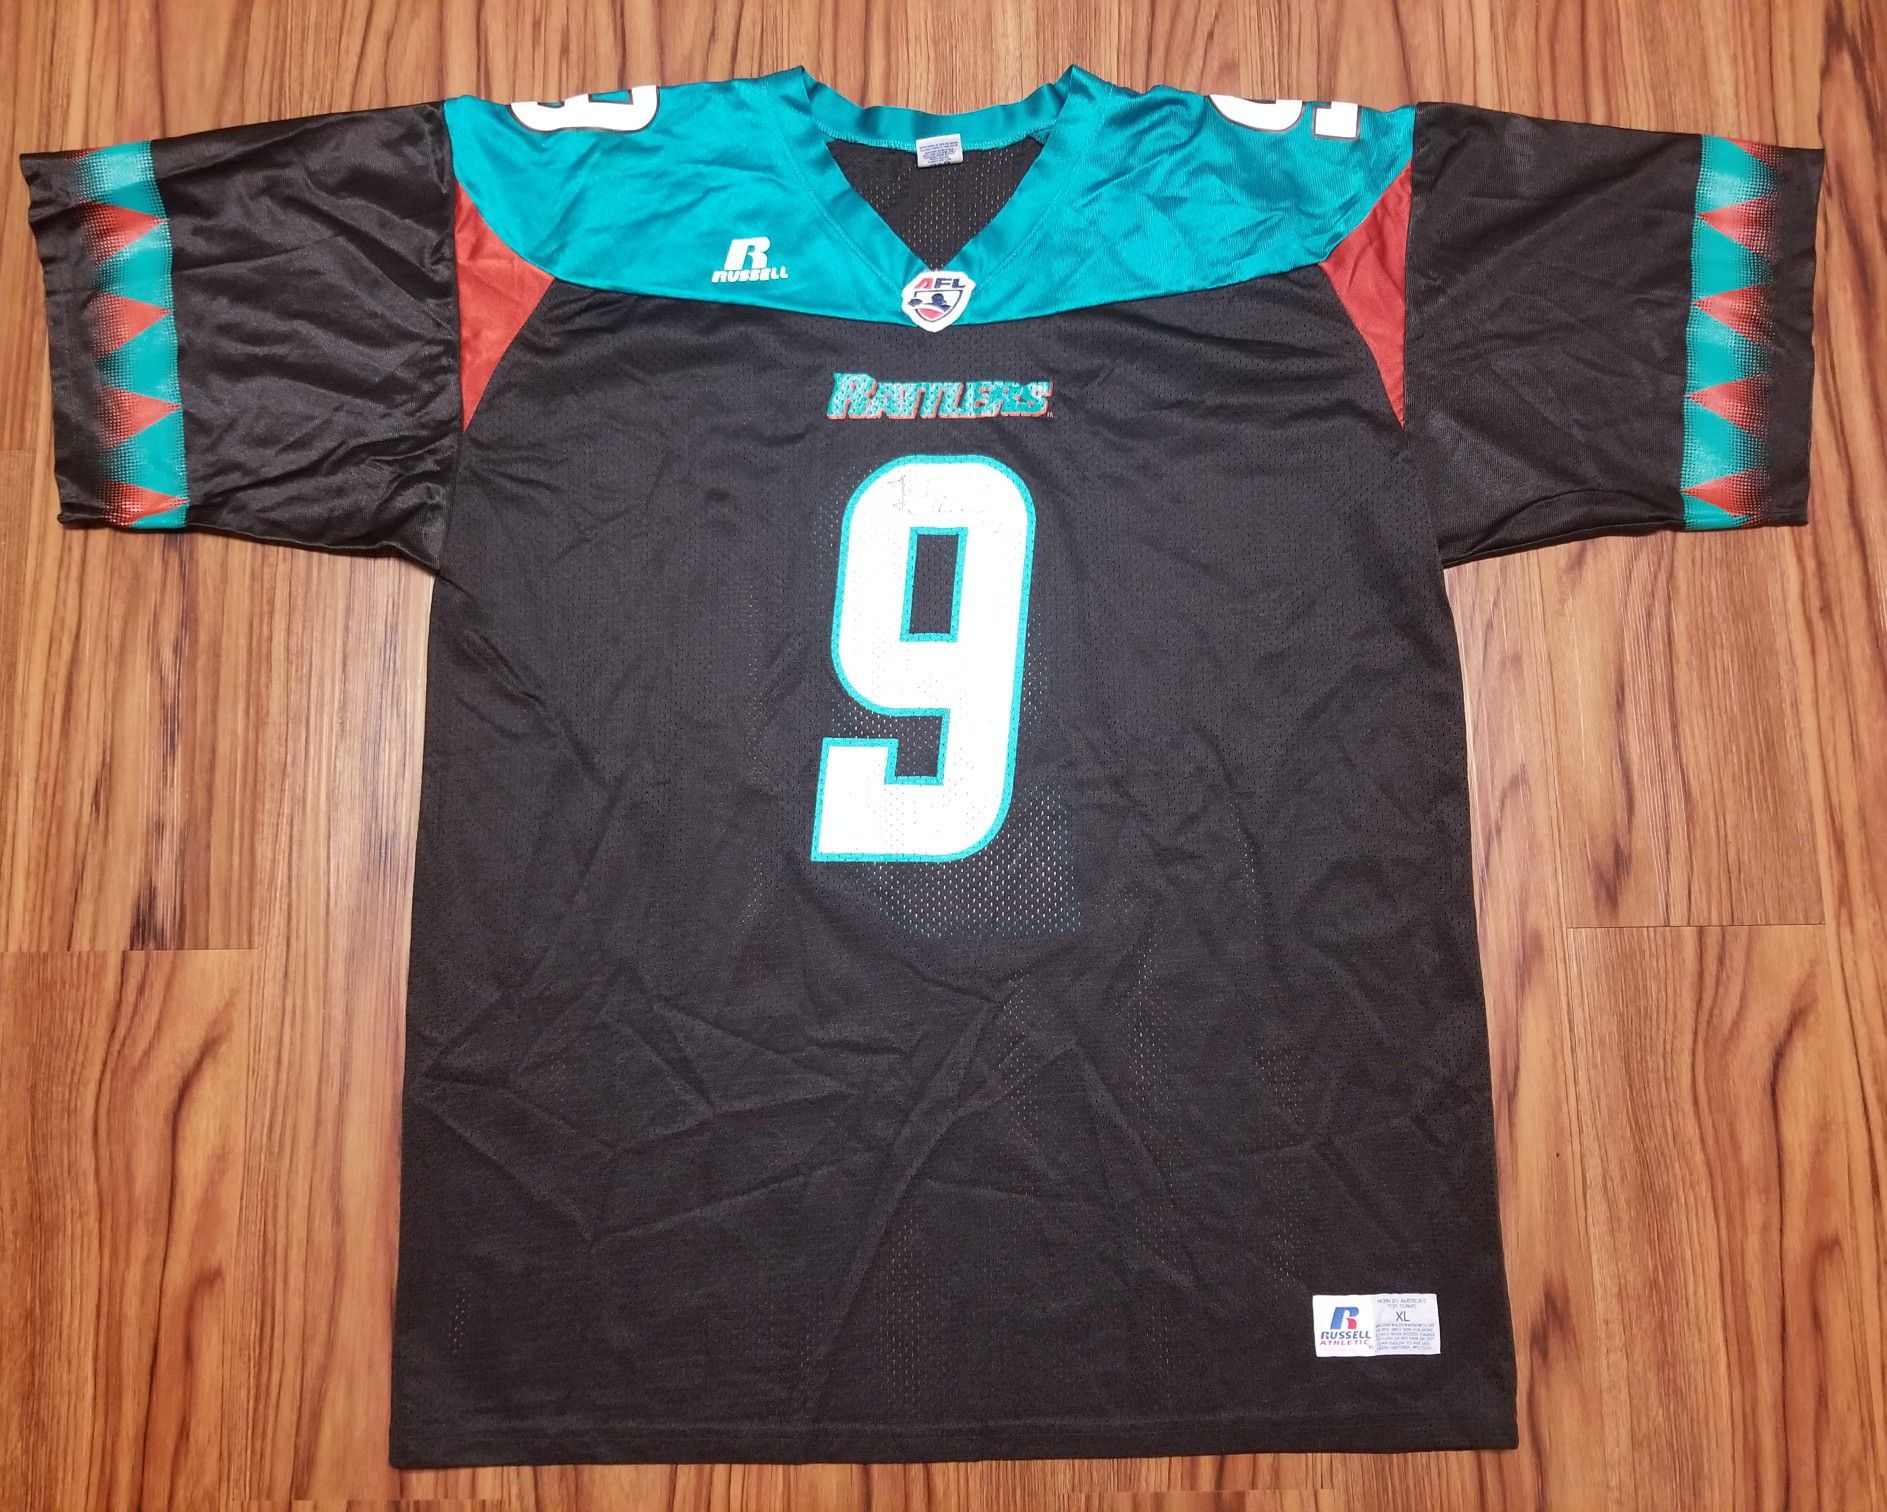 Russell Athletic Jerseys Football Clothing for Men for sale